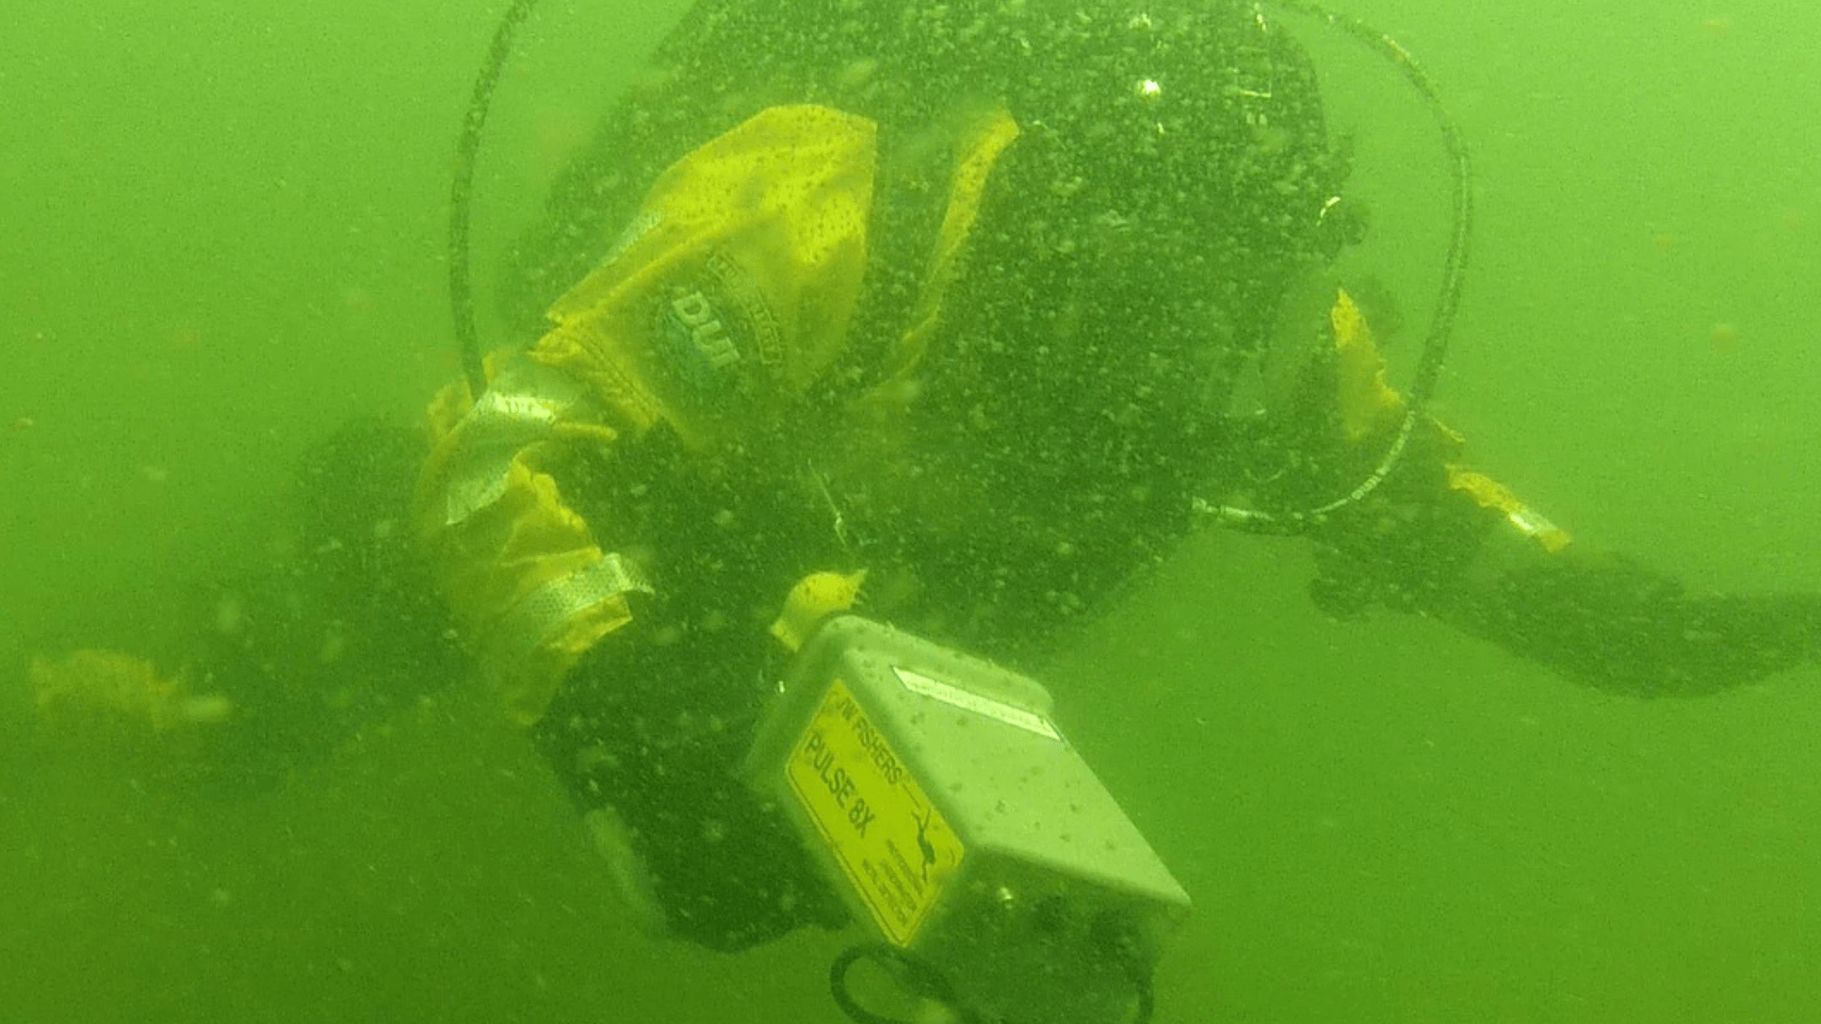 A diver under water using the Pulse 8X